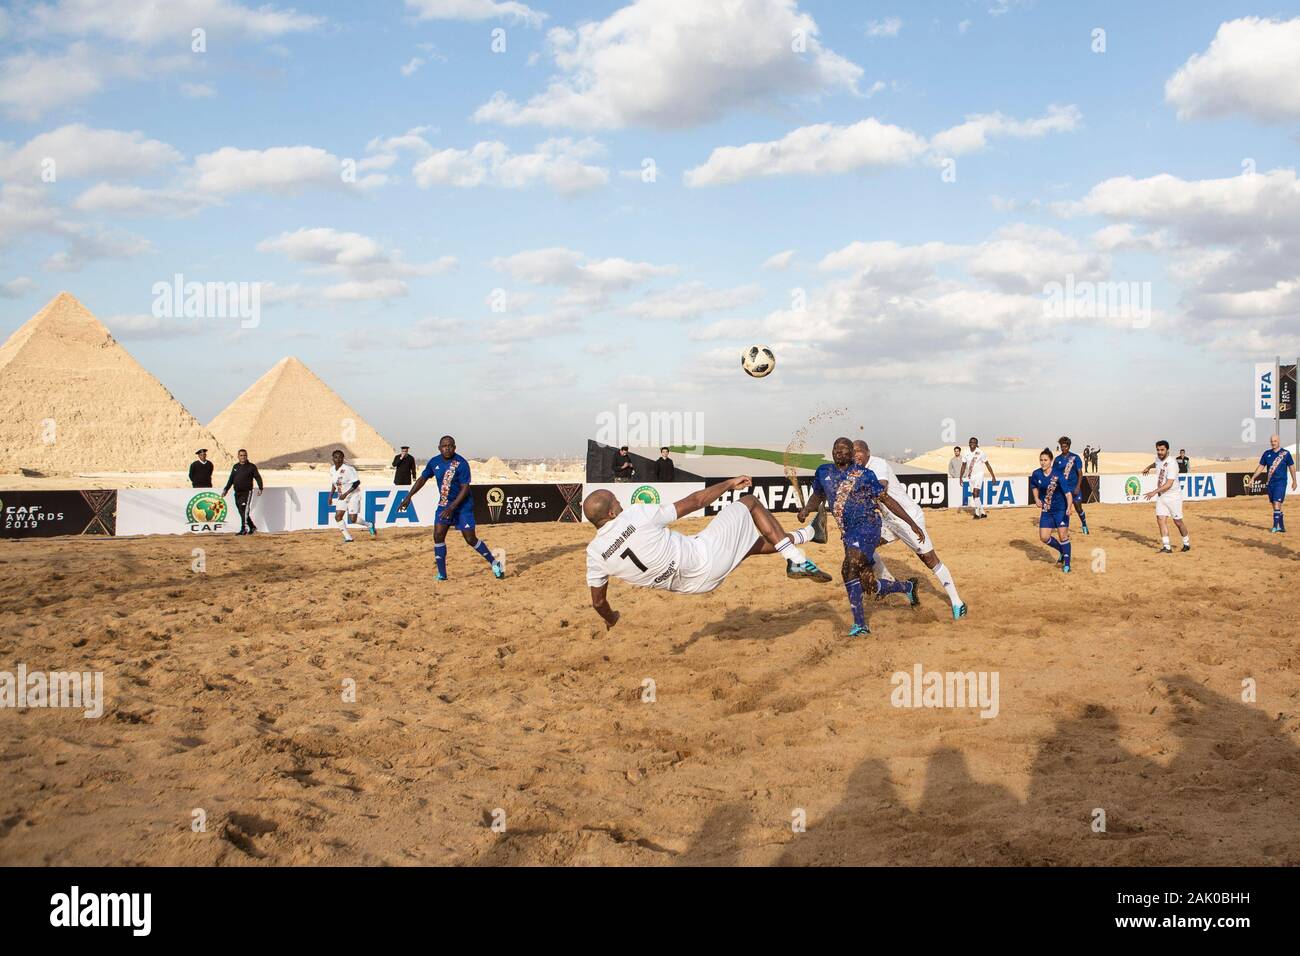 Giza, Egypt. 06th Jan, 2020. A view of the exhibition match between the CAF and FIFA Legends at the Giza Pyramids complex, ahead of the CAF awards 2019. The CAF awards 2019 Gala is scheduled to be held in Hurghada on 07 January 2020. Credit: Omar Zoheiry/dpa/Alamy Live News Stock Photo